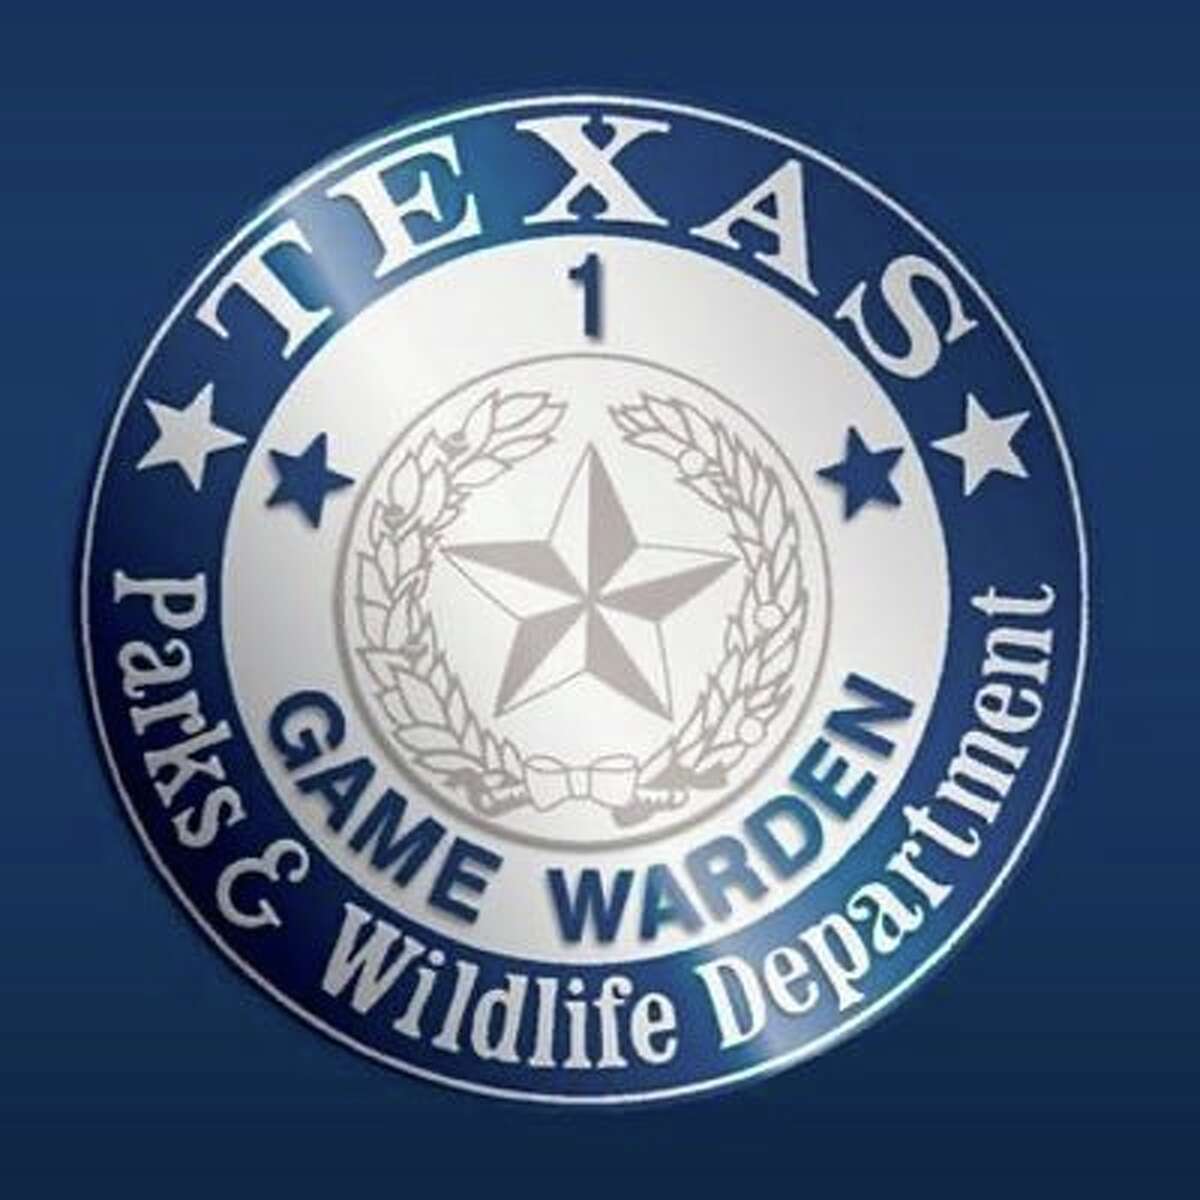 A recovery operation continues for a man who went missing following single boat crash in Orange County on Easter Sunday, according to Texas Game Wardens of the Law Enforcement Divison of the Texas Parks and Wildlife Department.